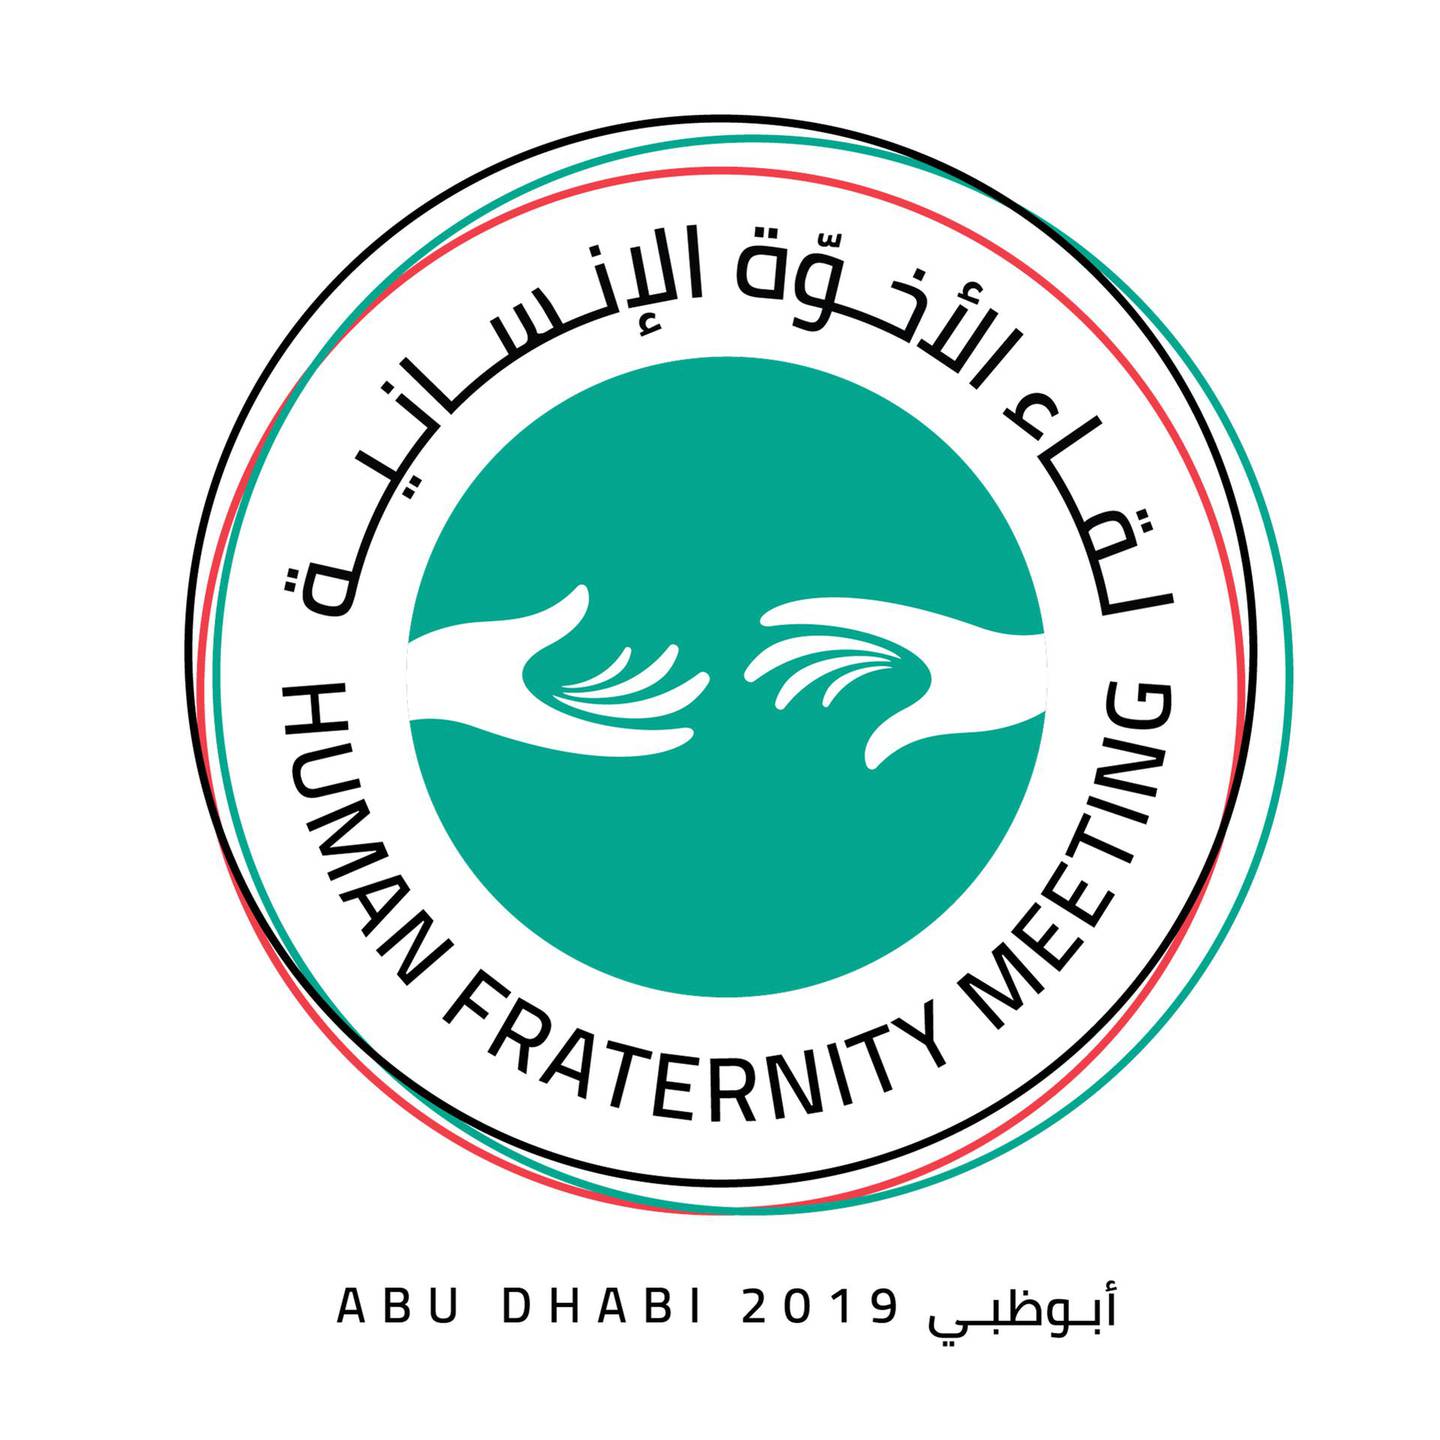 The logo for the Human Fraternity Meeting, held on February 4.